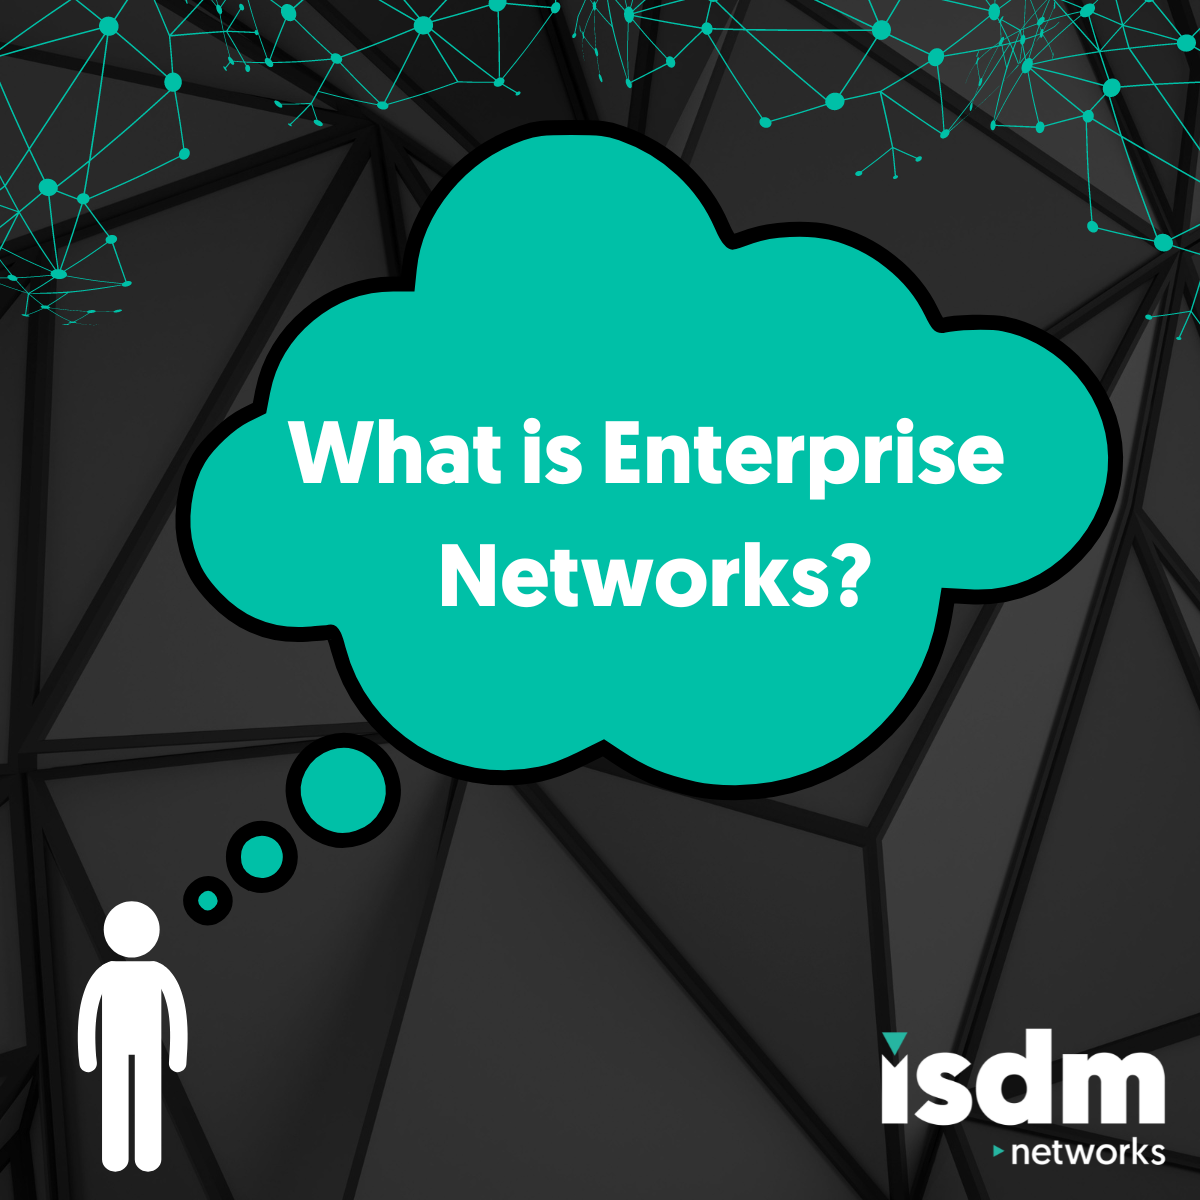 What is Enterprise Networks?